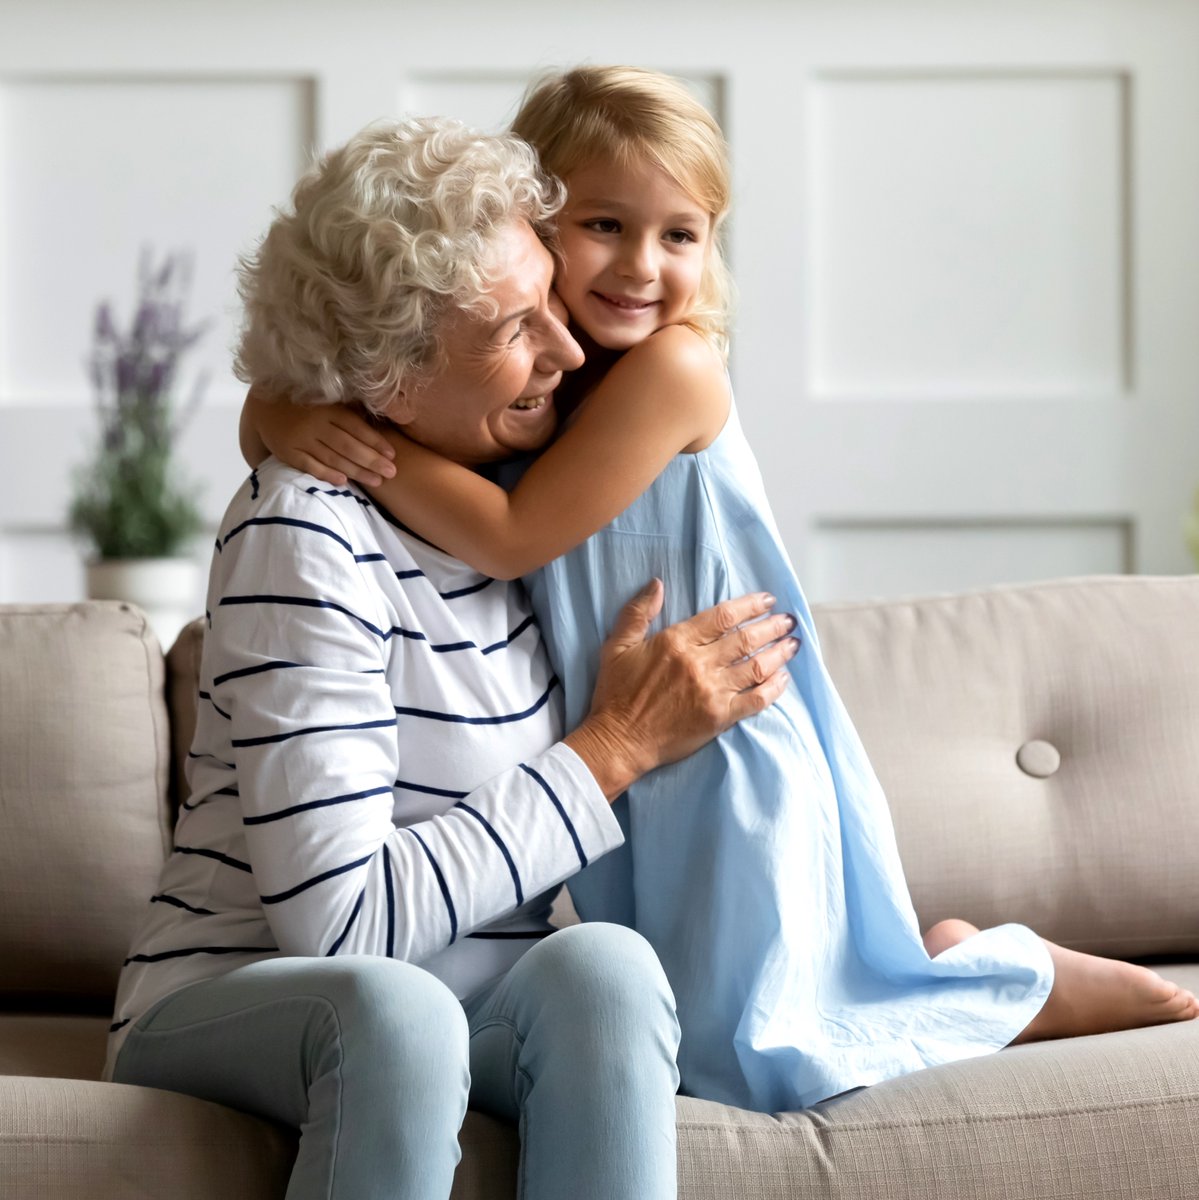 I cherish the time with my Alma. 15 Reasons Being a Grandparent Is Way More Fun Than Being a Parent bit.ly/3qHWqAx #agingwithattitude #aginginplace #independentliving #thrivinginmotion #cherish